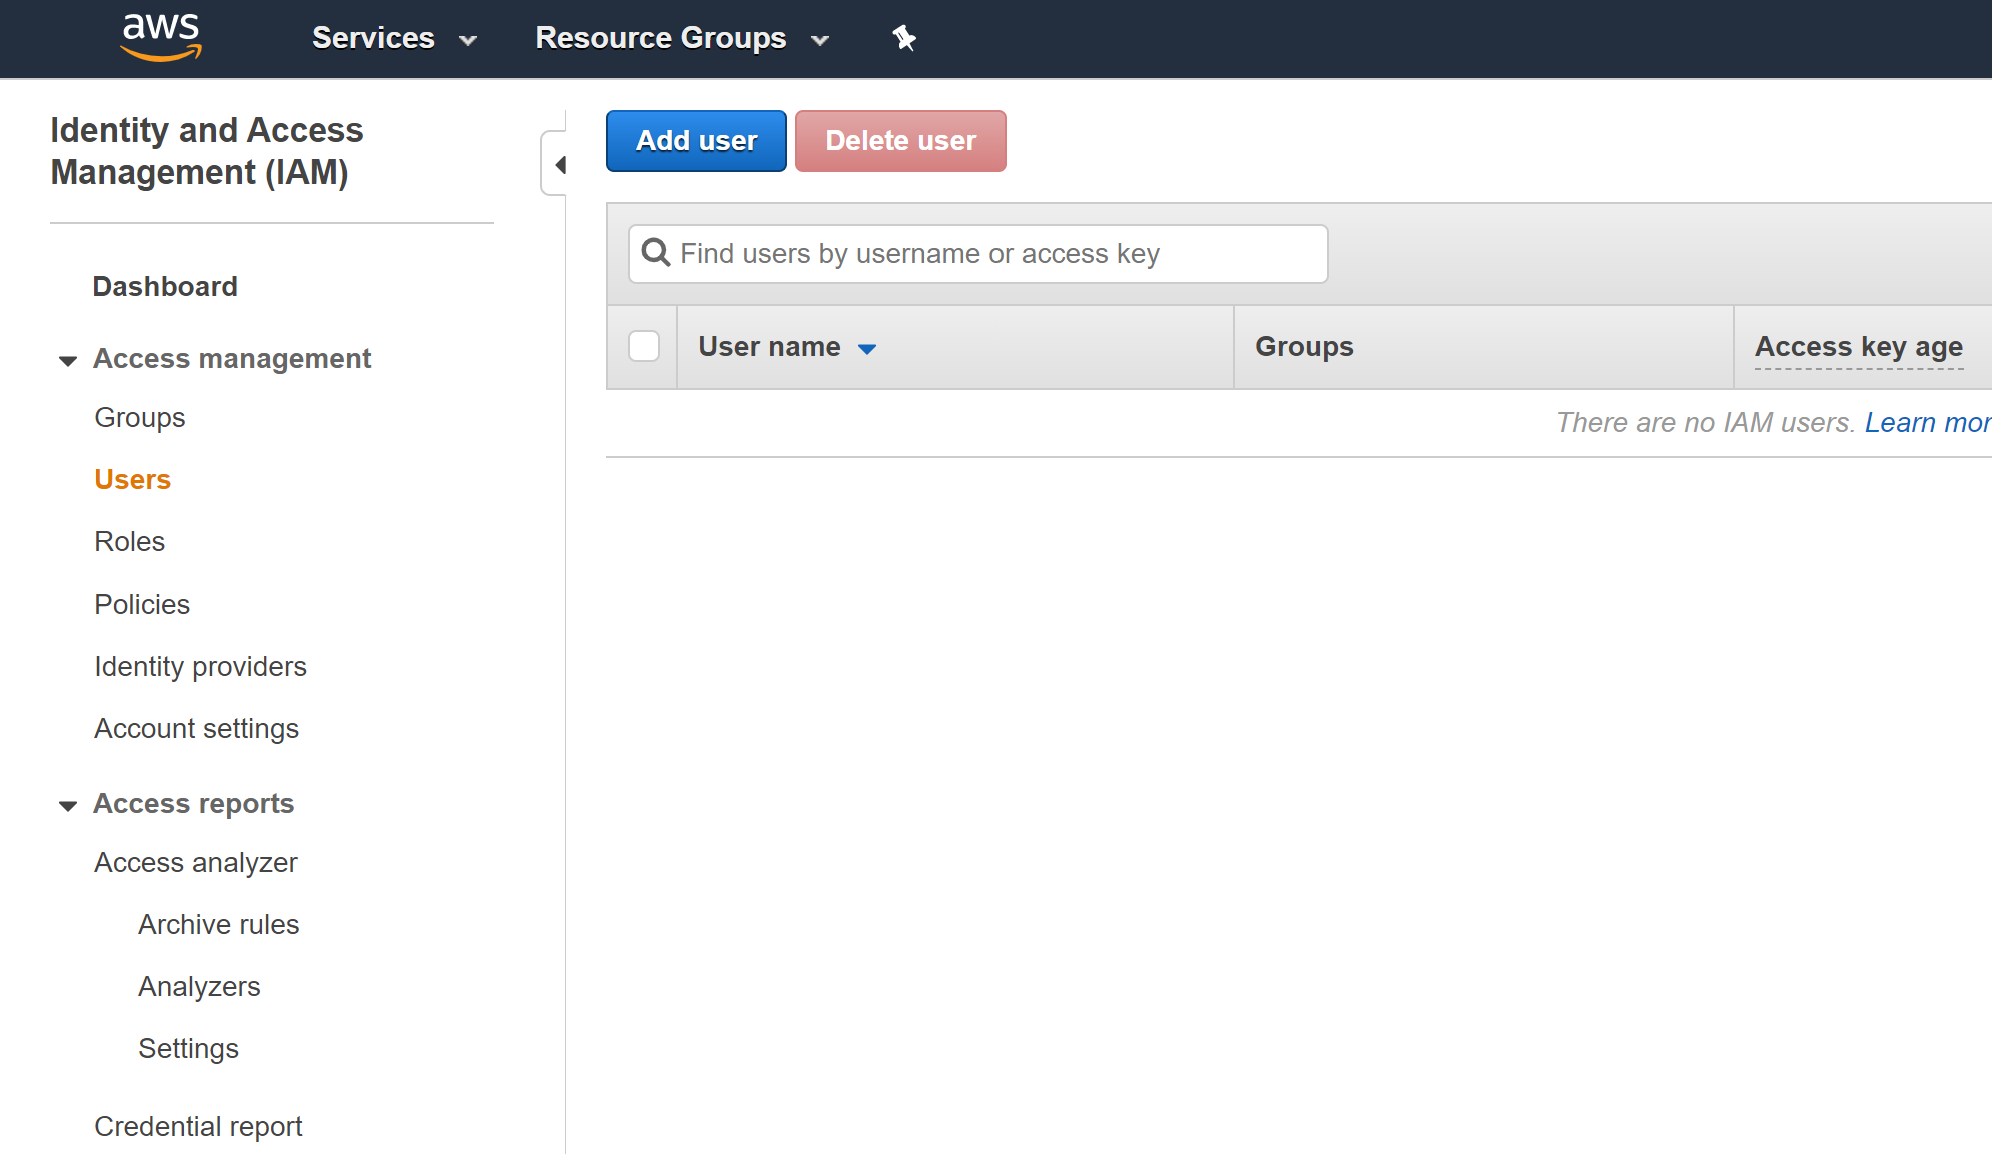 A screenshot of how to create a new user in an AWS cloud console.